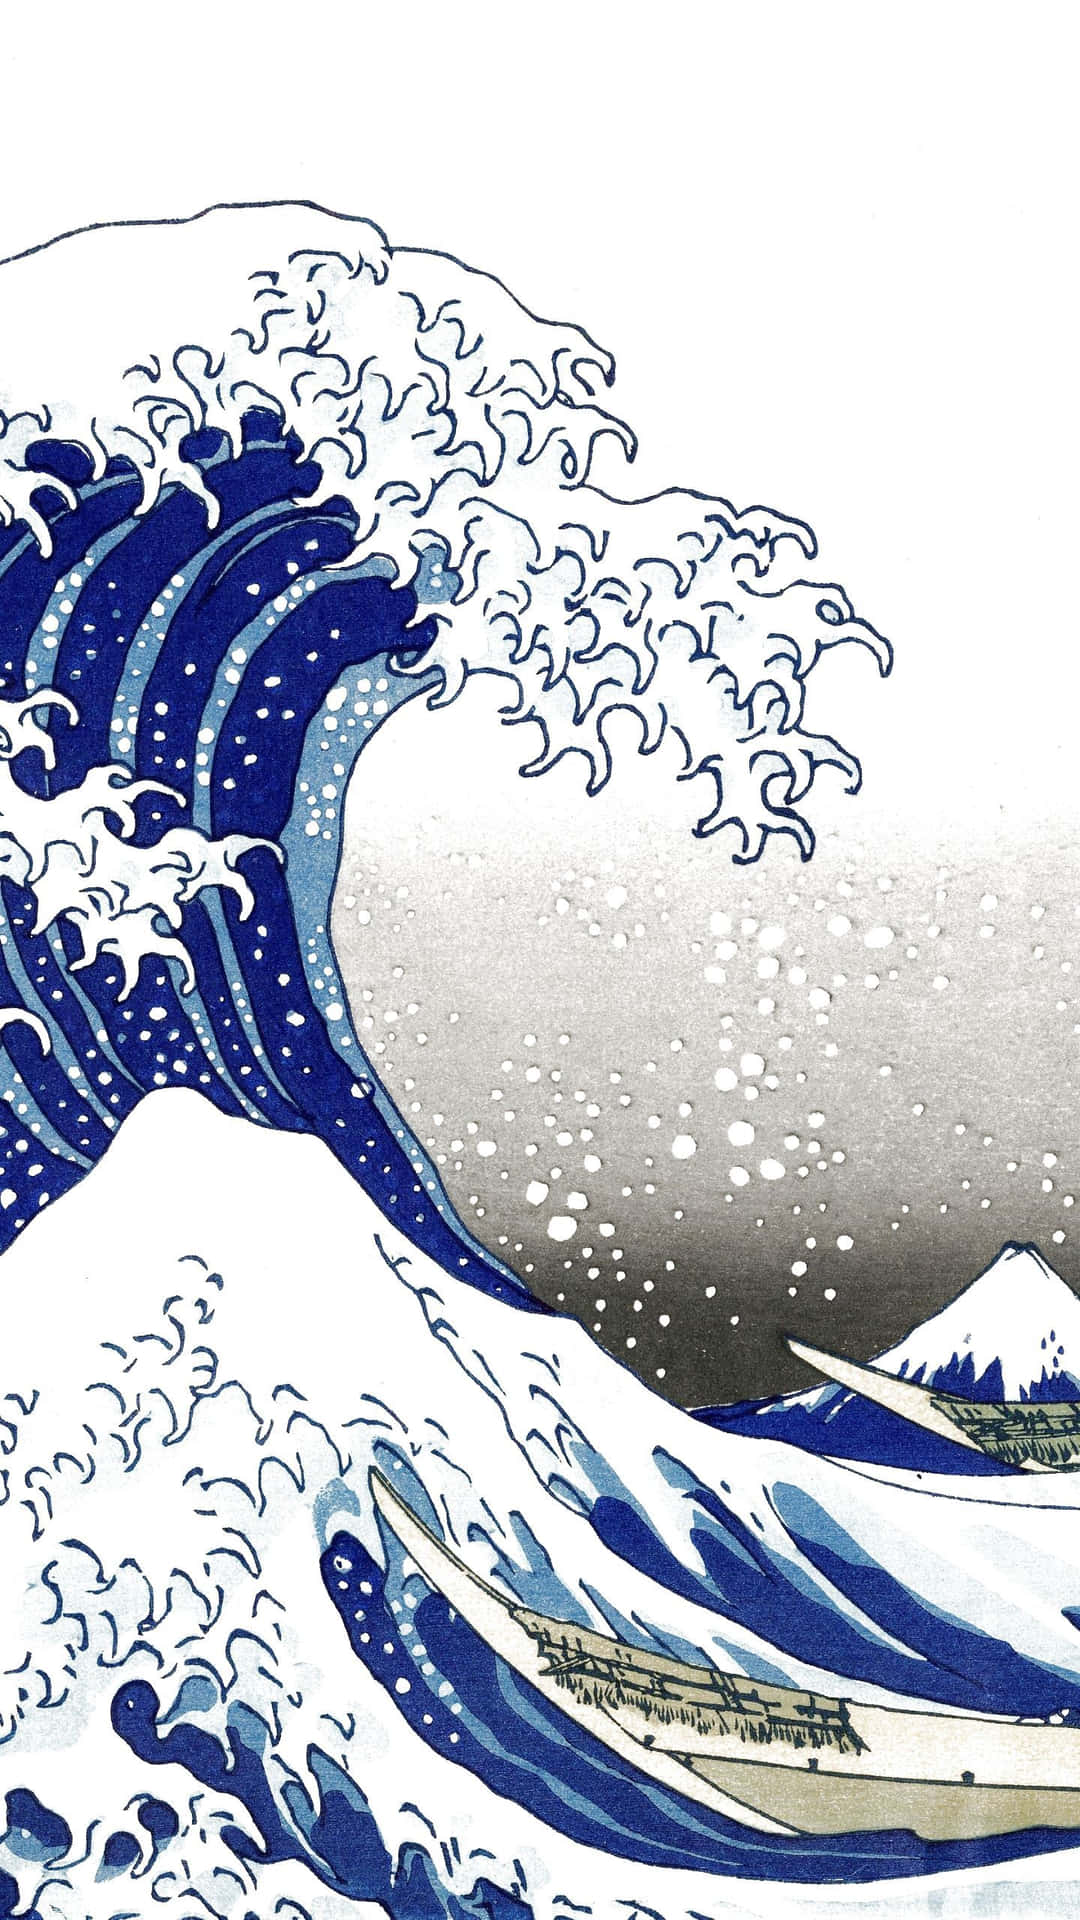 The Great Wave Wallpaper